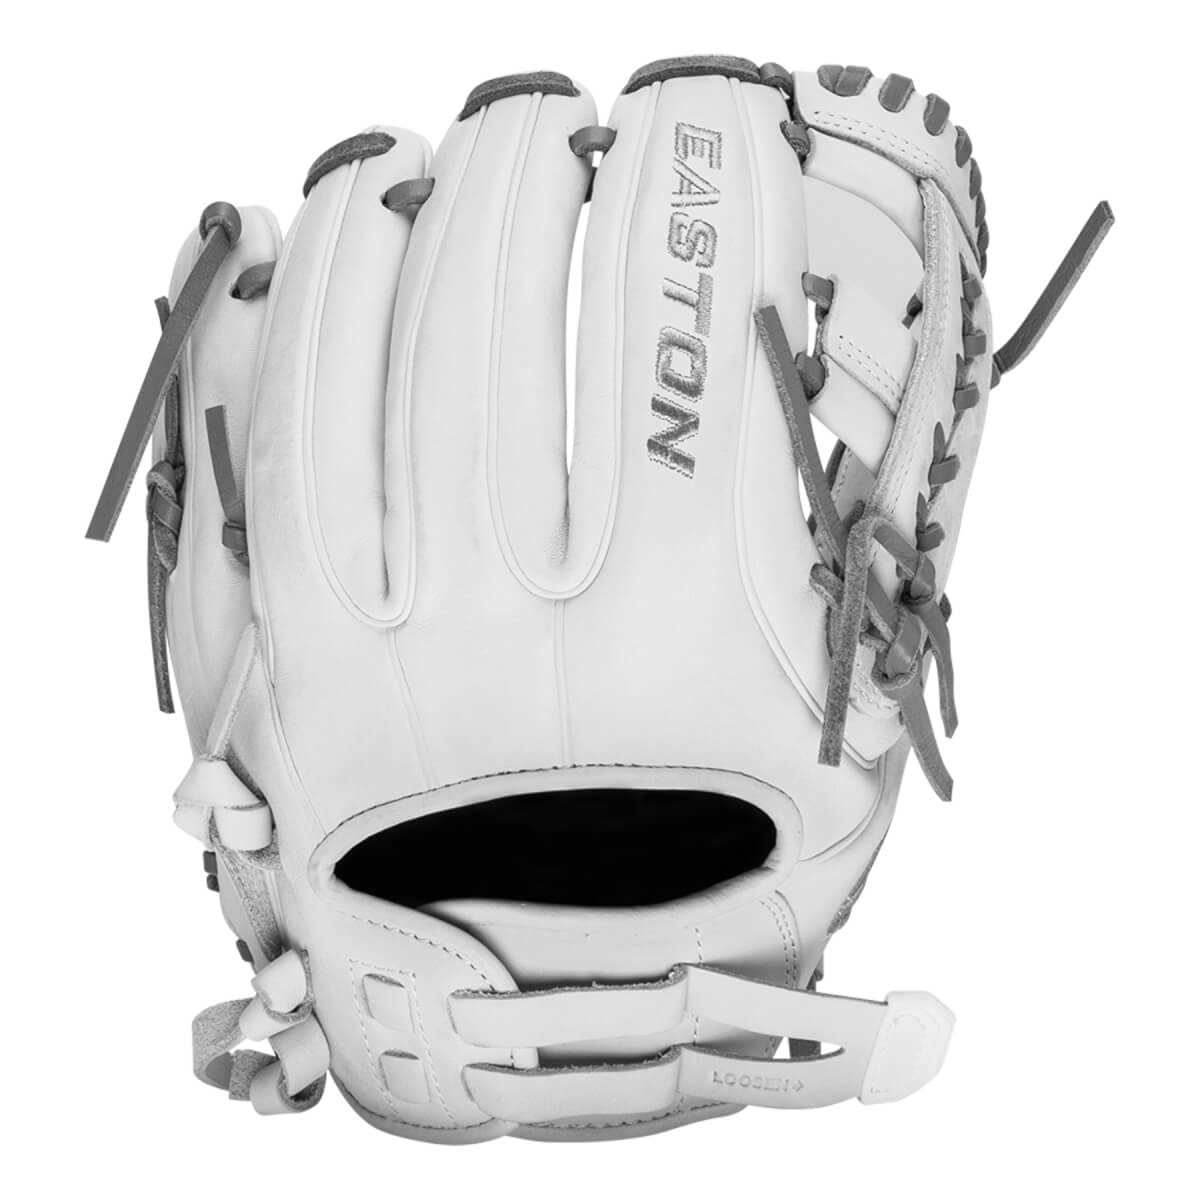 Easton Pro Collection 11.75" Fastpitch Softball Glove - PCFP1175-19W